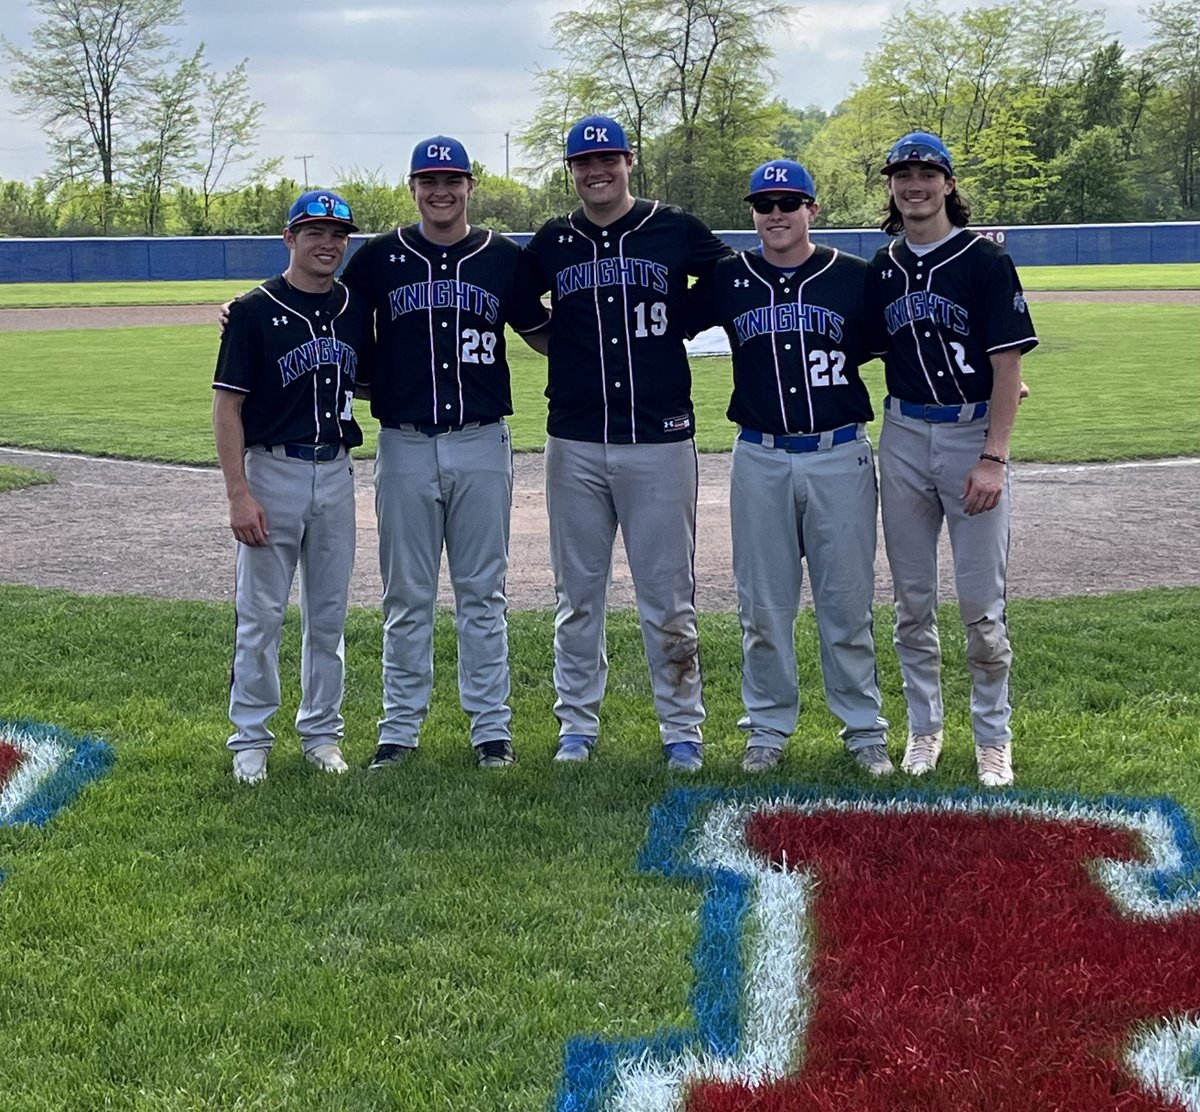 Nolan, Levi, Connor, Preston, and Hunter thank you for all of your hard work, sacrifice, loyalty, and selflessness! You have all embodied what it means to be a Crestview Baseball Player! We are proud of you, but we are not done yet!!! #GoKnights#NotDoneYet